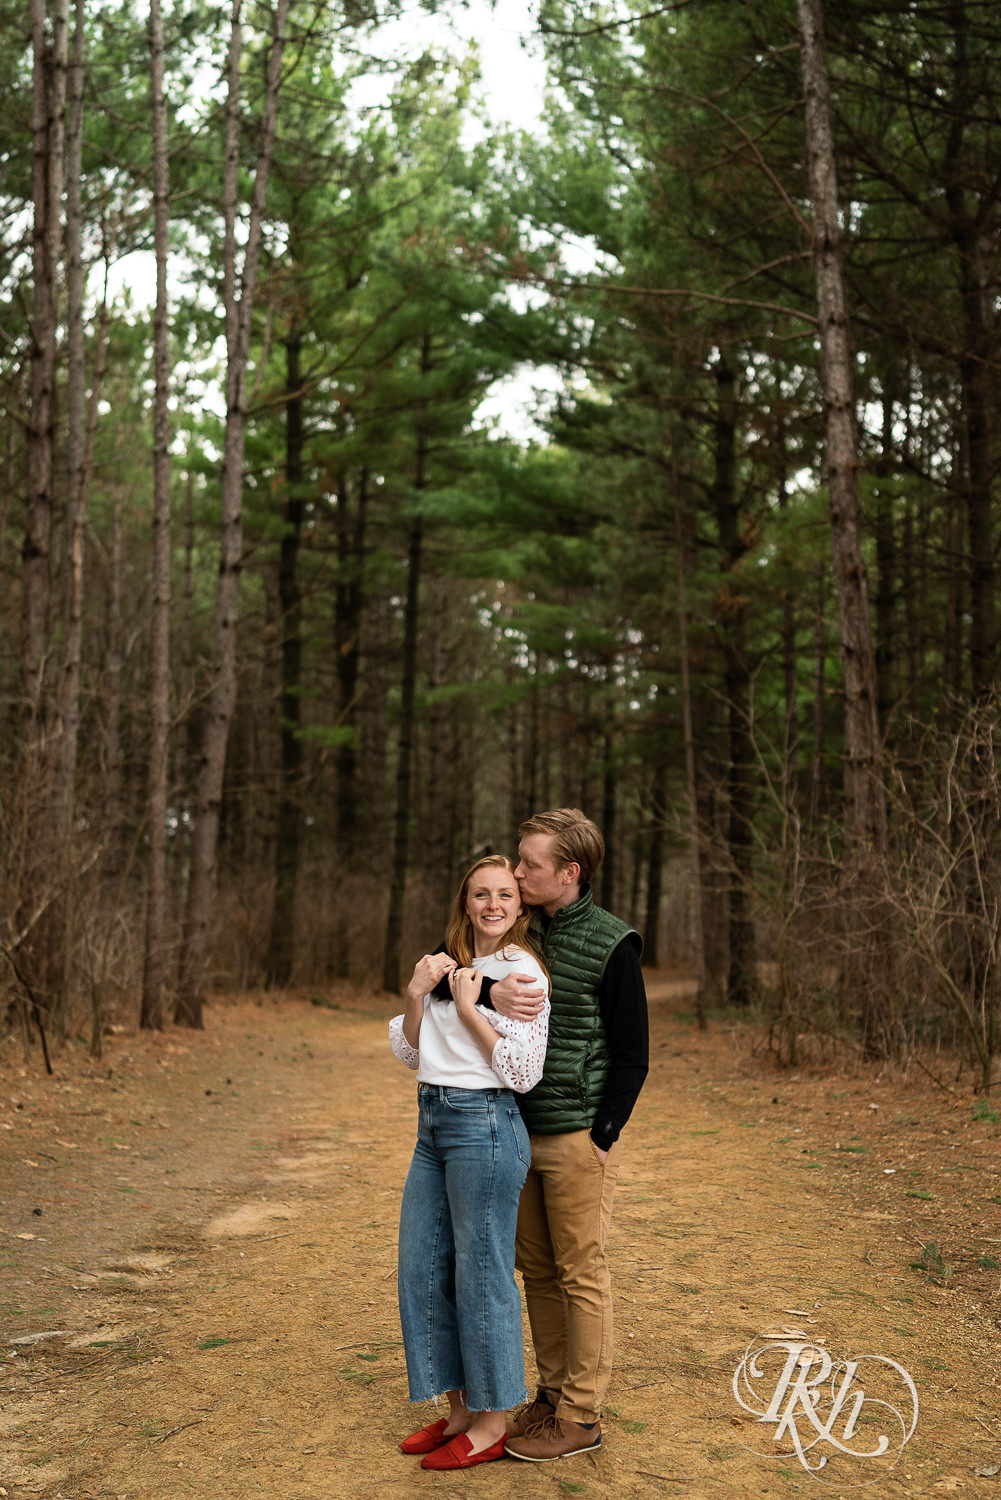 Man and woman dressed in jeans and a kiss in the woods in Eagan, Minnesota with pine trees in the background.